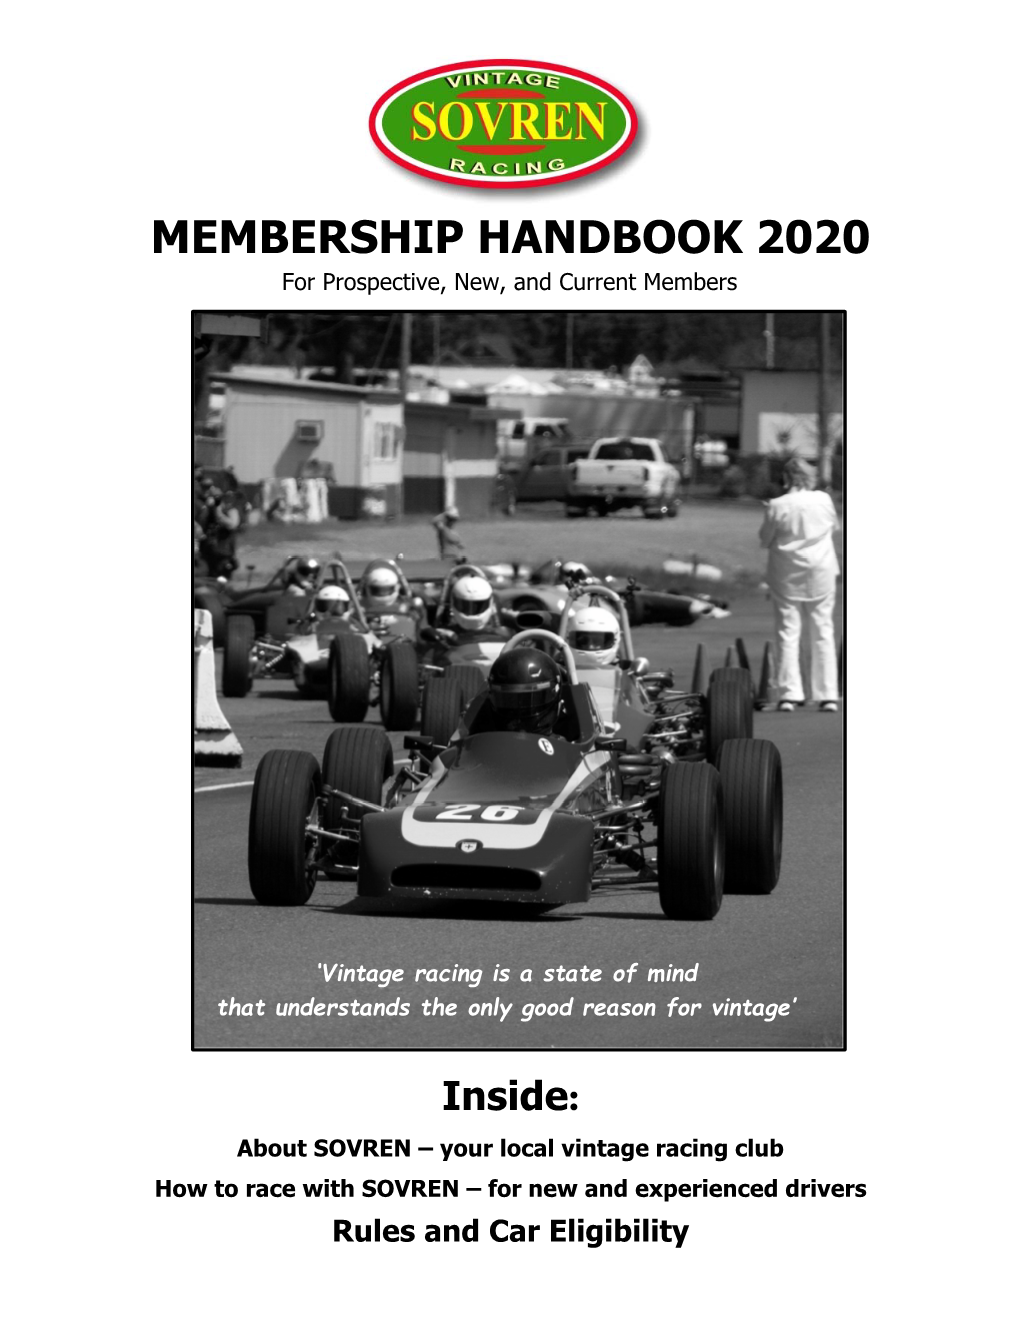 MEMBERSHIP HANDBOOK 2020 for Prospective, New, and Current Members